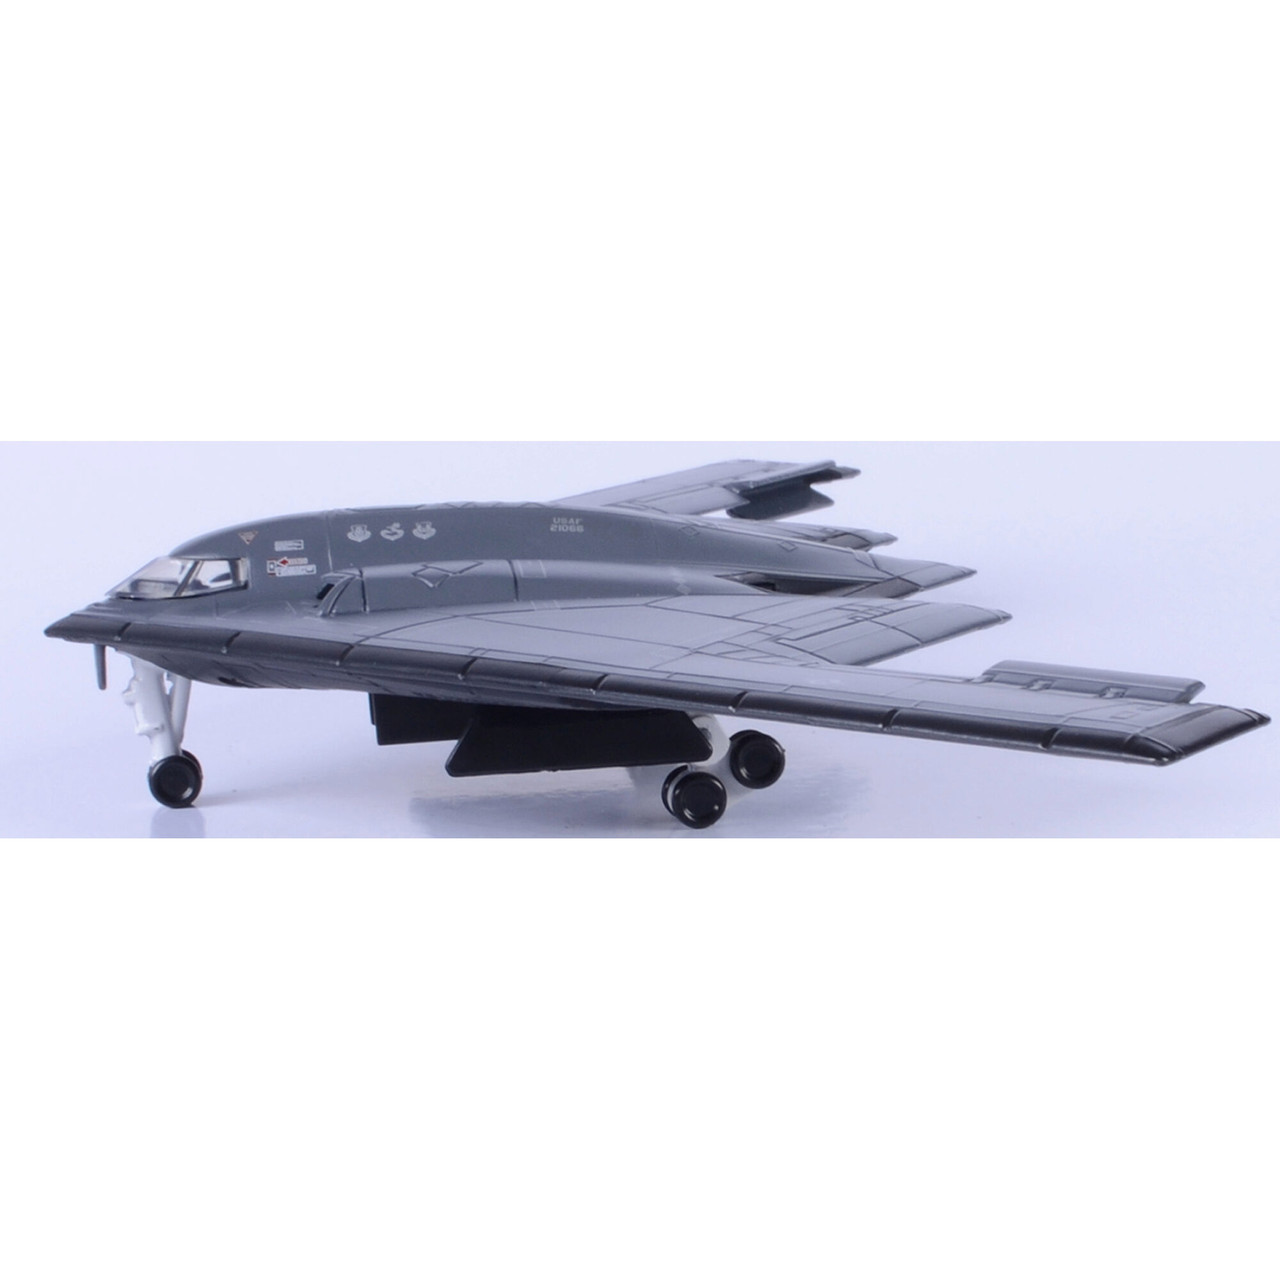 B-2 Spirit Stealth Bomber 1:144 Scale Diecast Model by Sky Wings